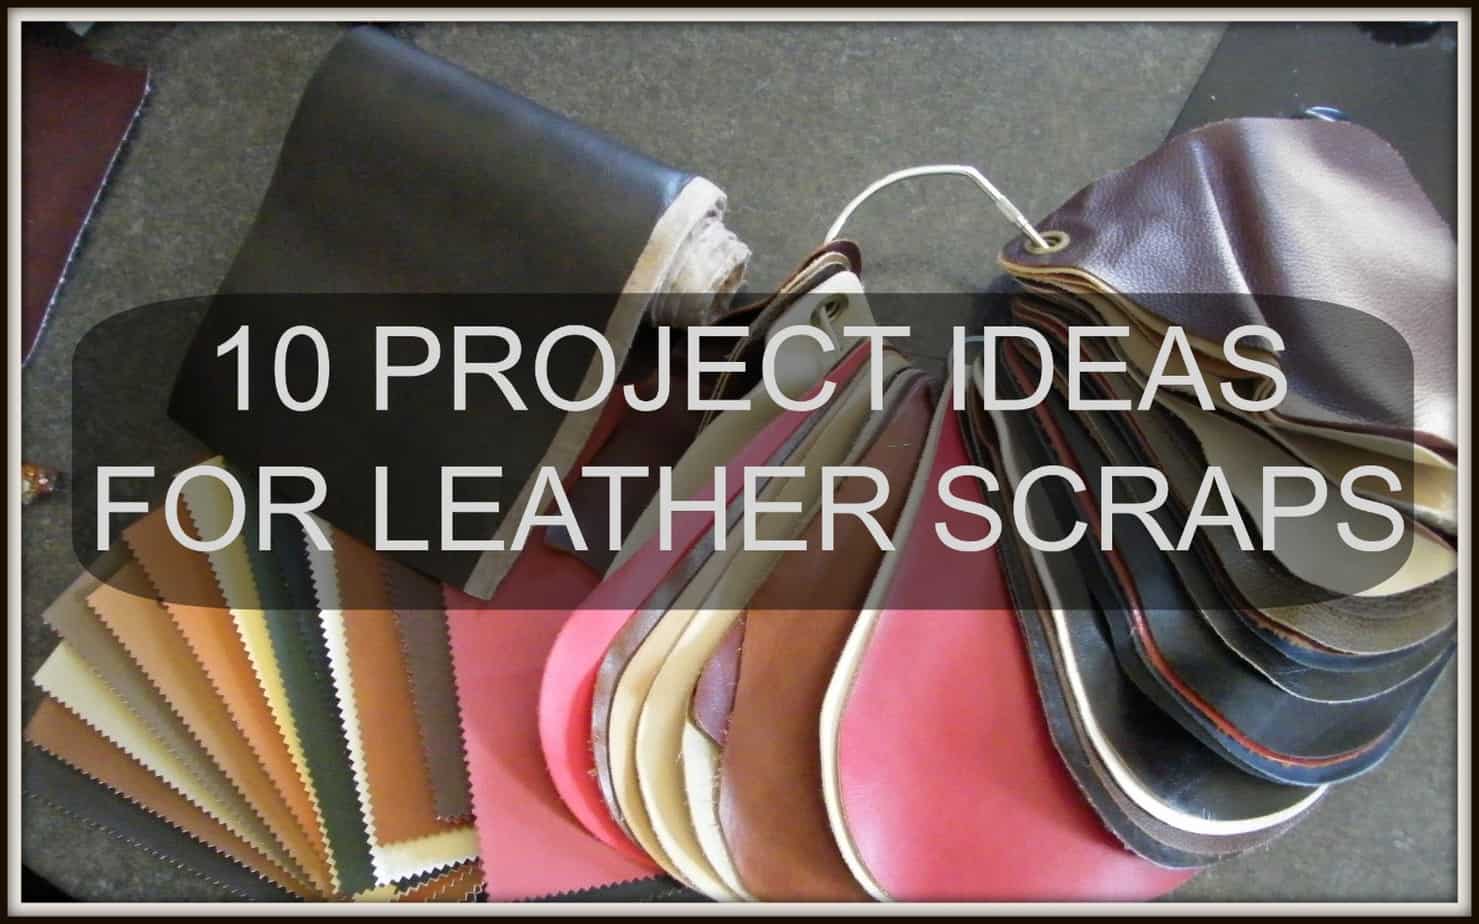 Top 10 Projects to Make with Leather Scraps